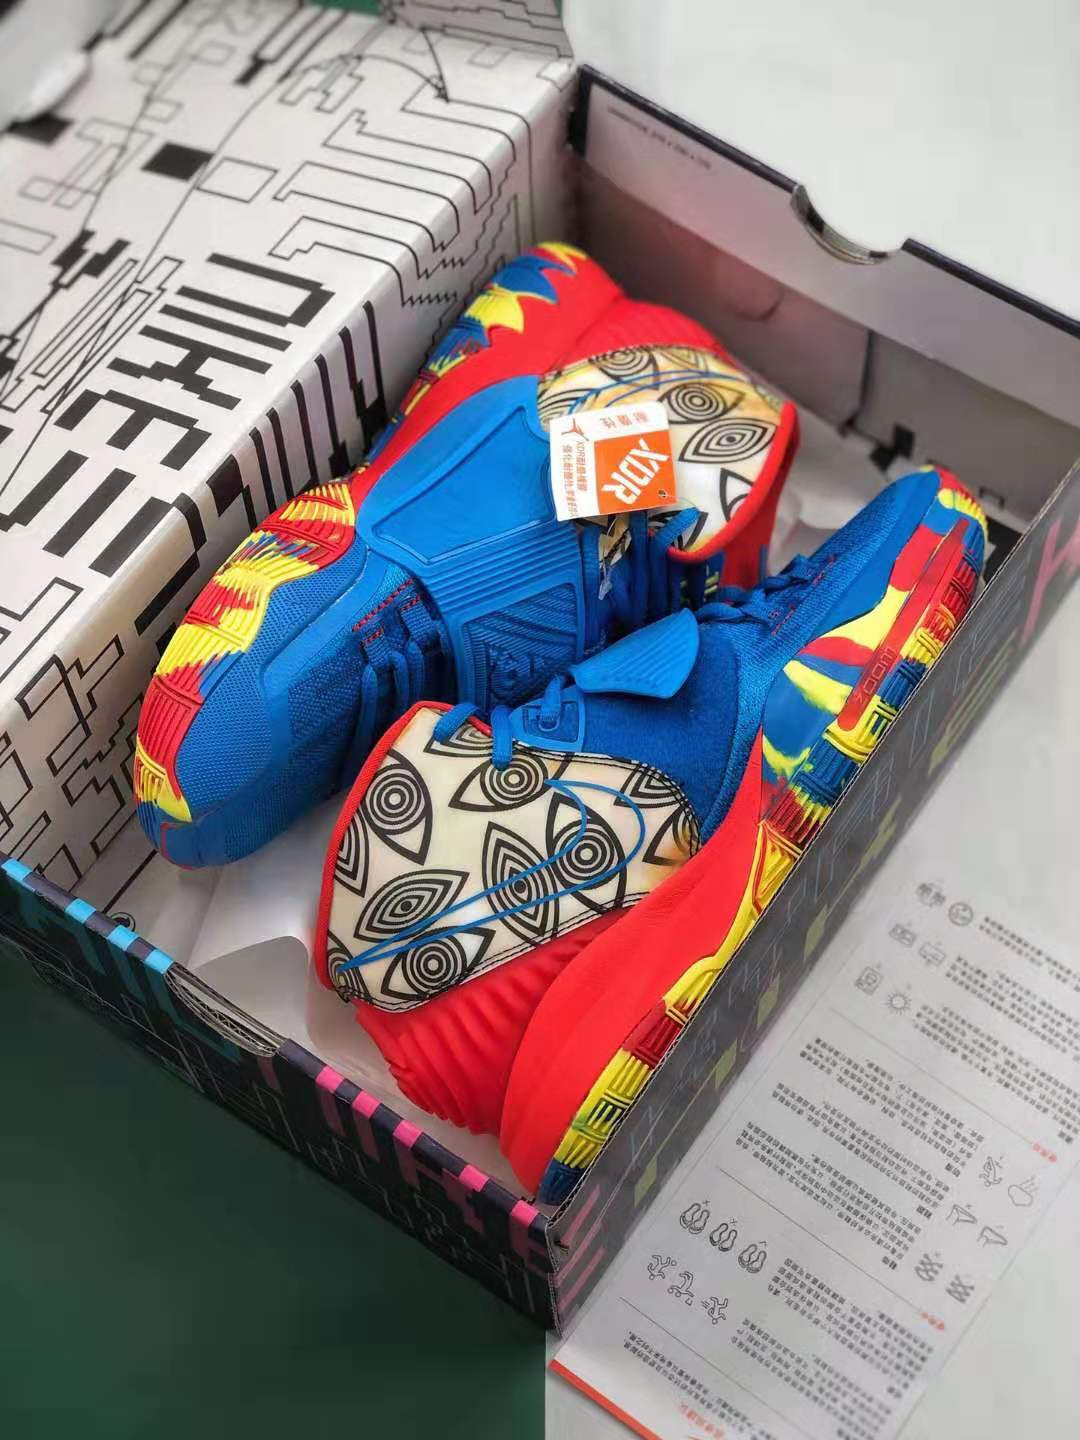 Nike Kyrie 6 Pre Heat Guangzhou Multicolor CQ7634-409 - Unique Design and Superior Performance at Your Feet